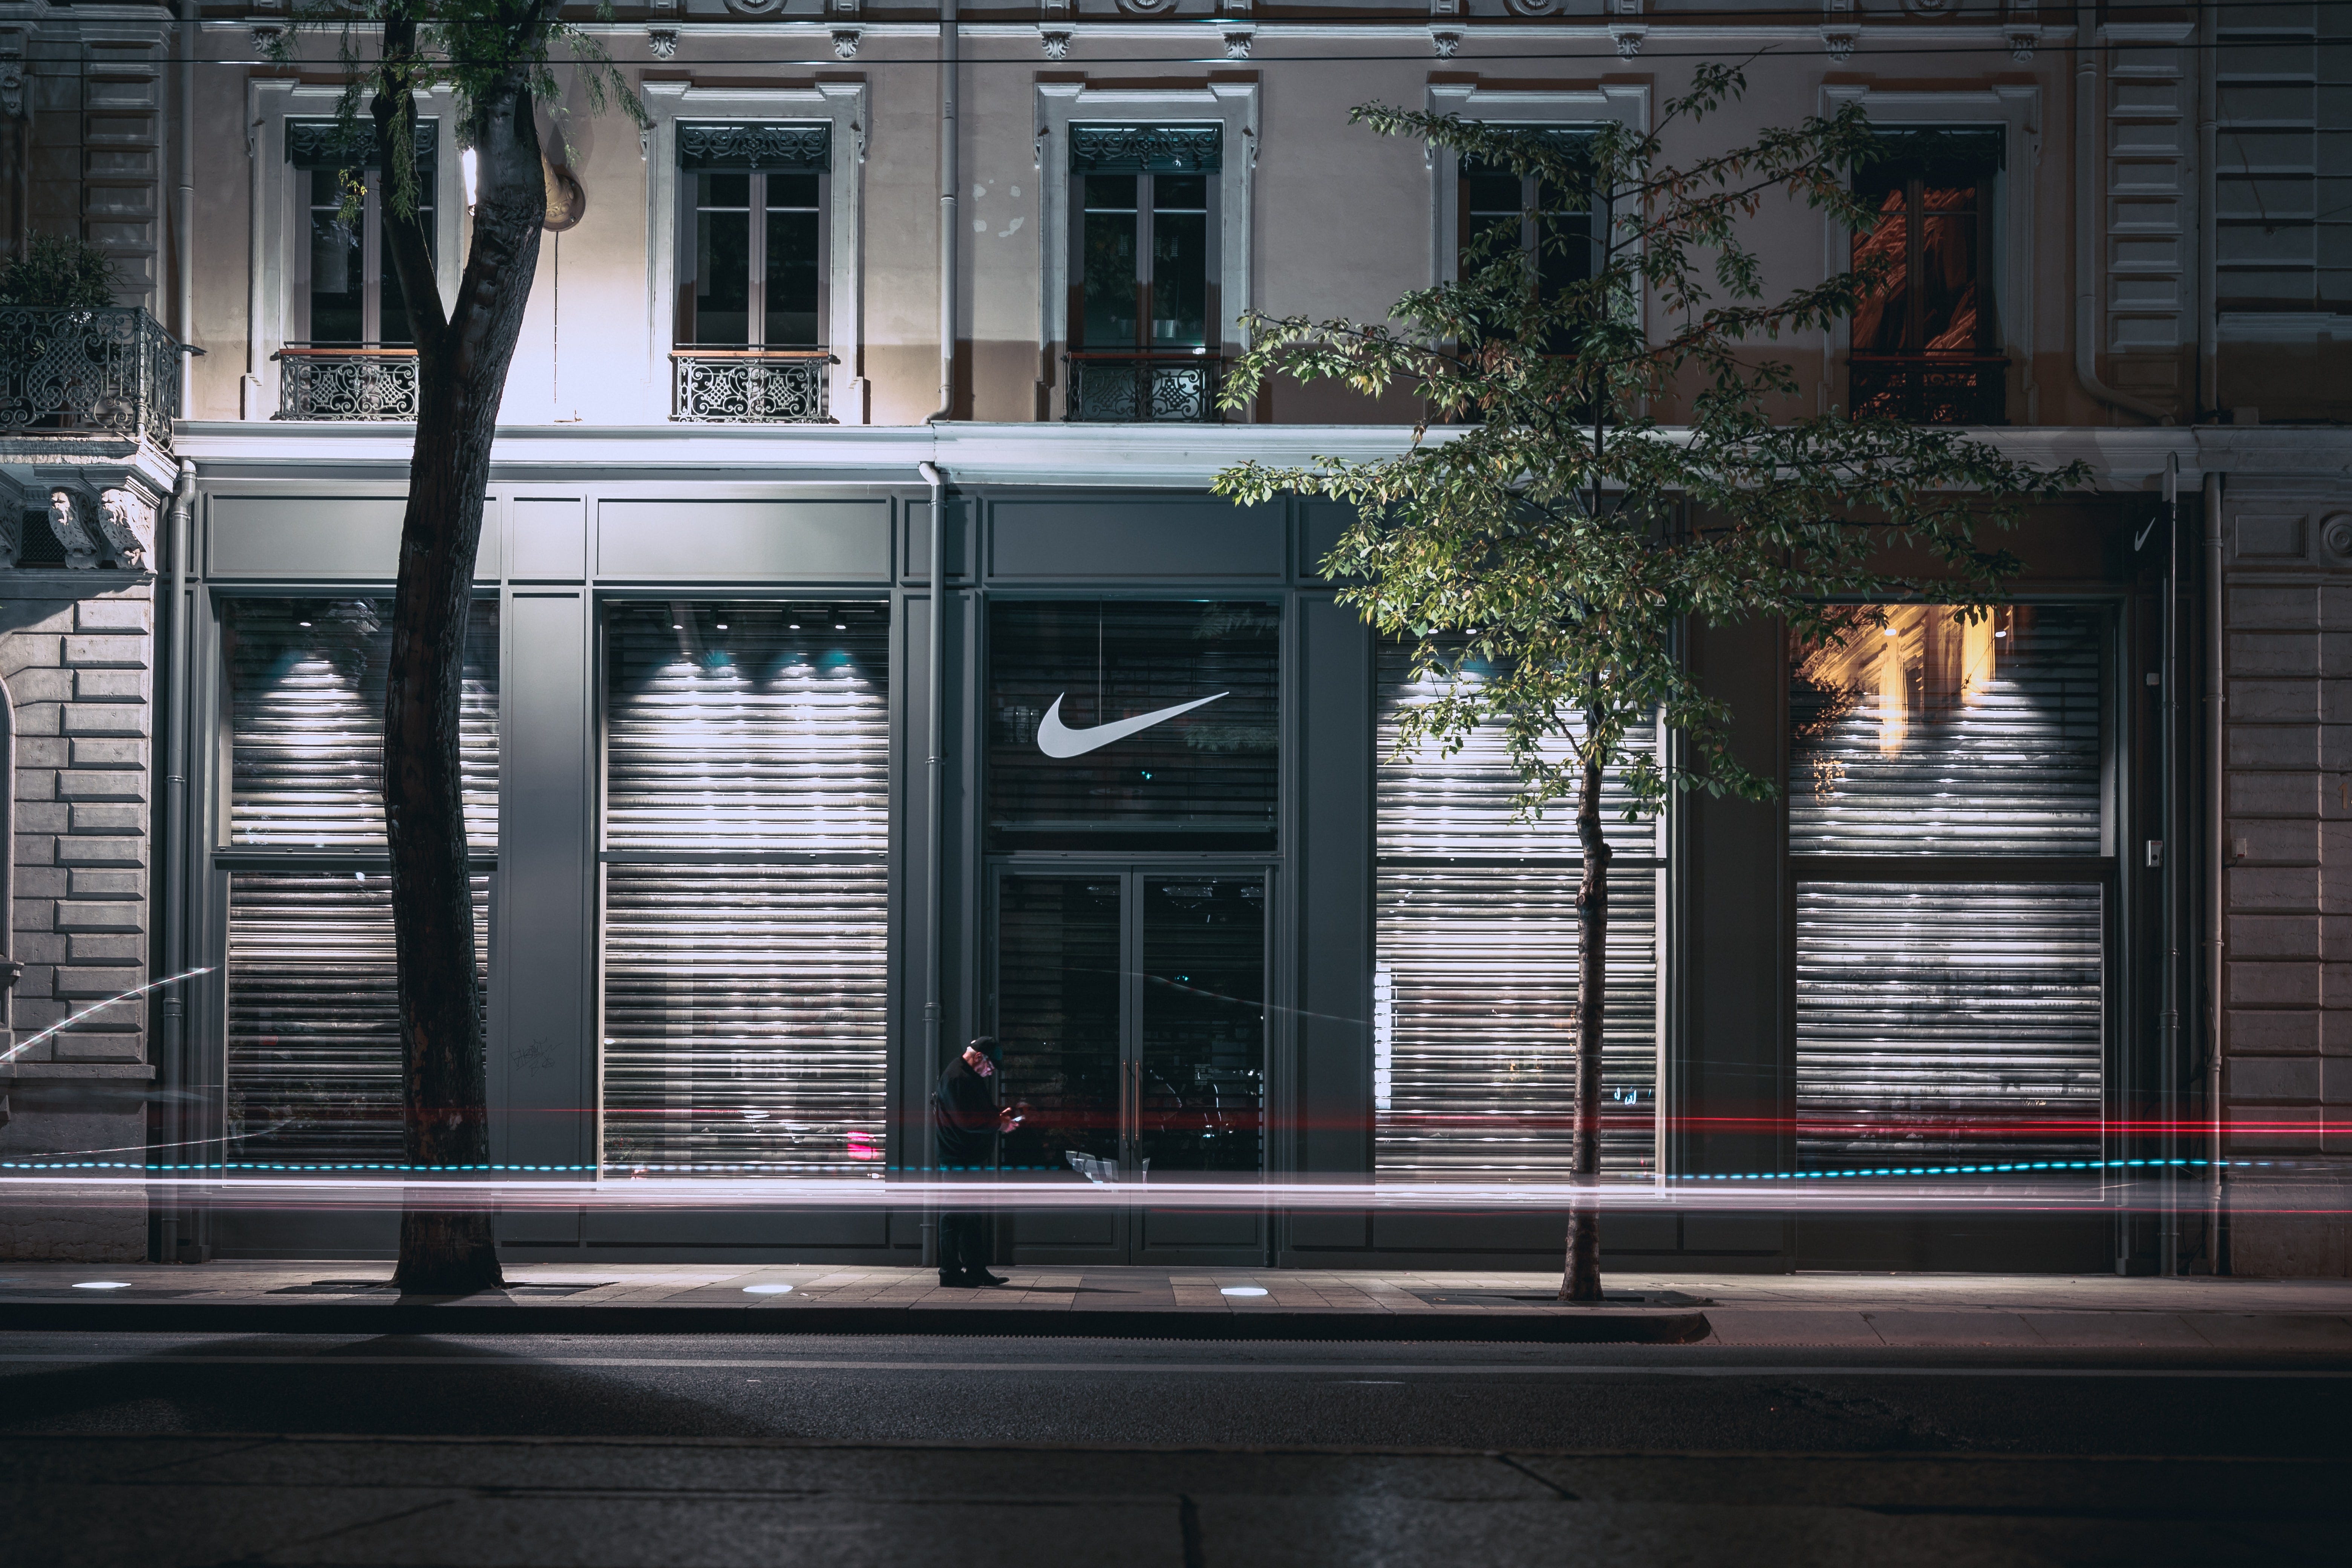 Why Nike left (and why it smart)